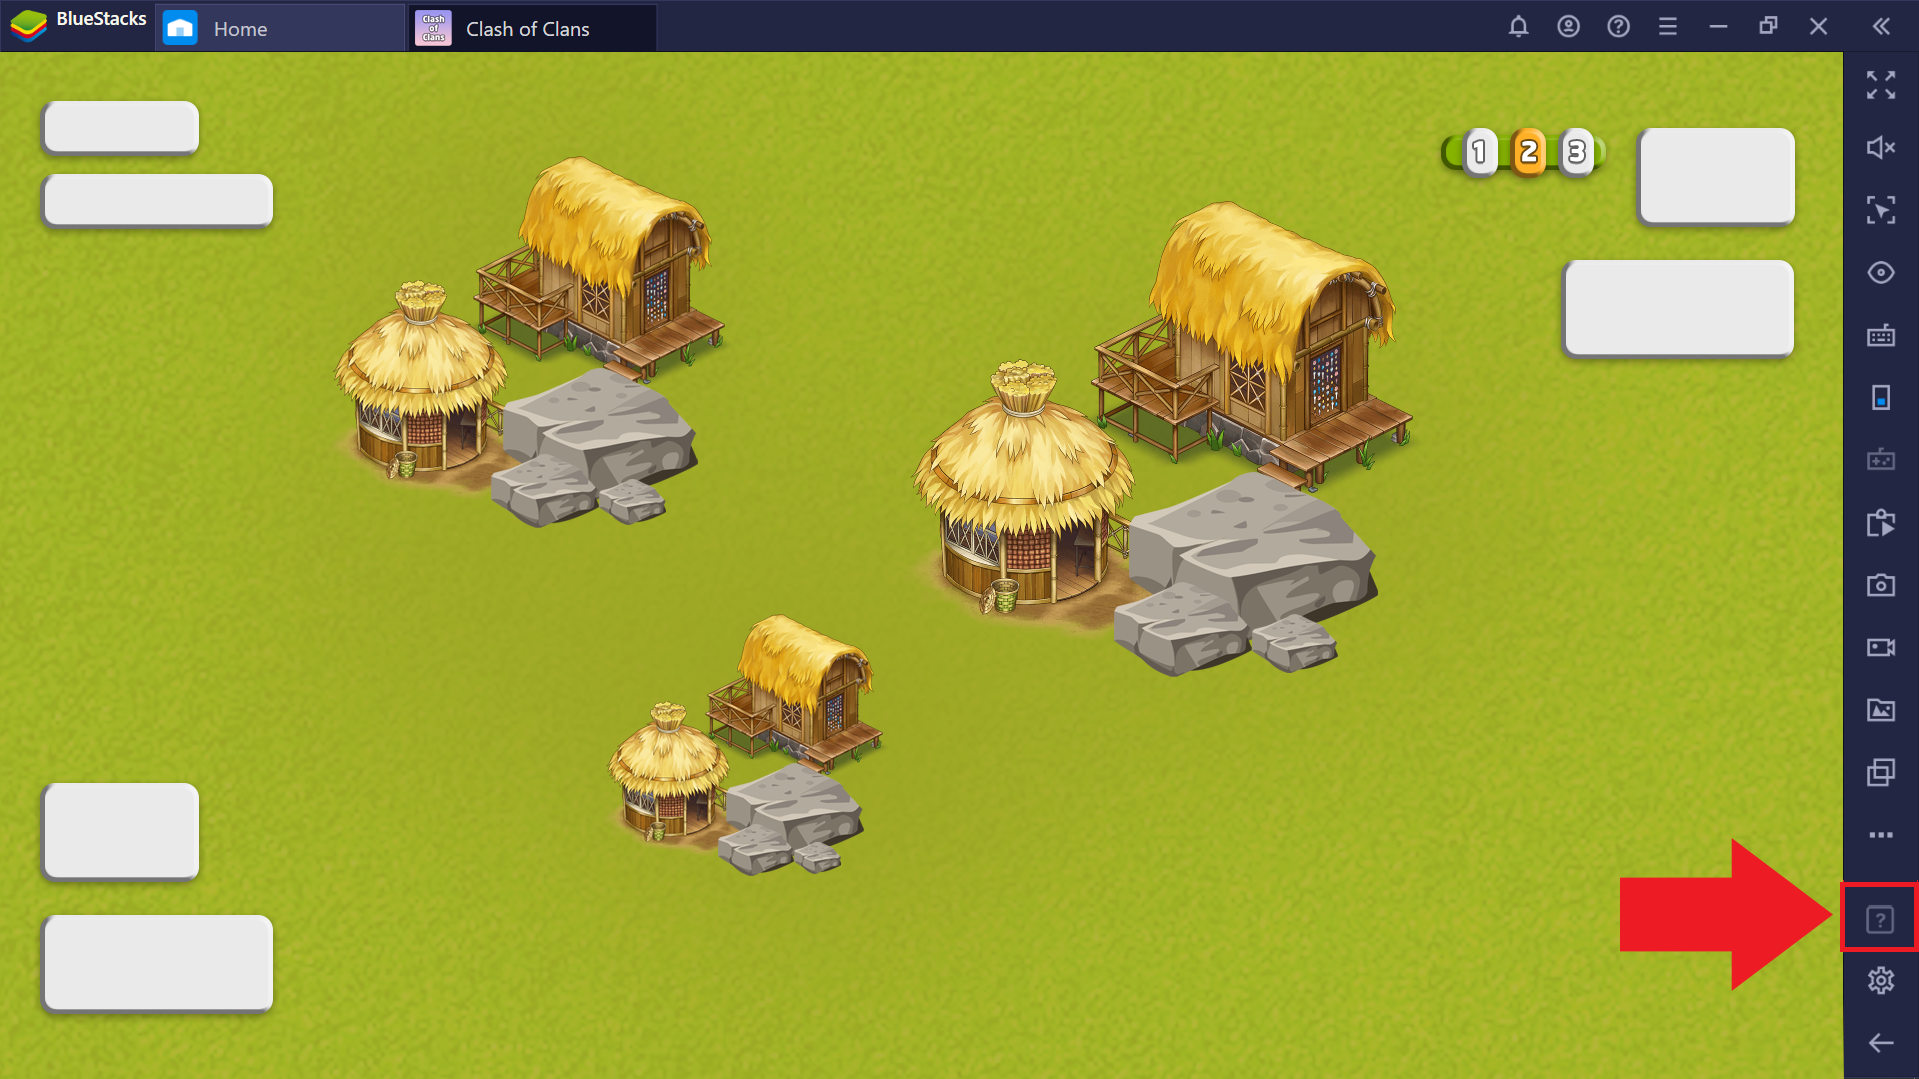 clash of clans bluestacks zoom out